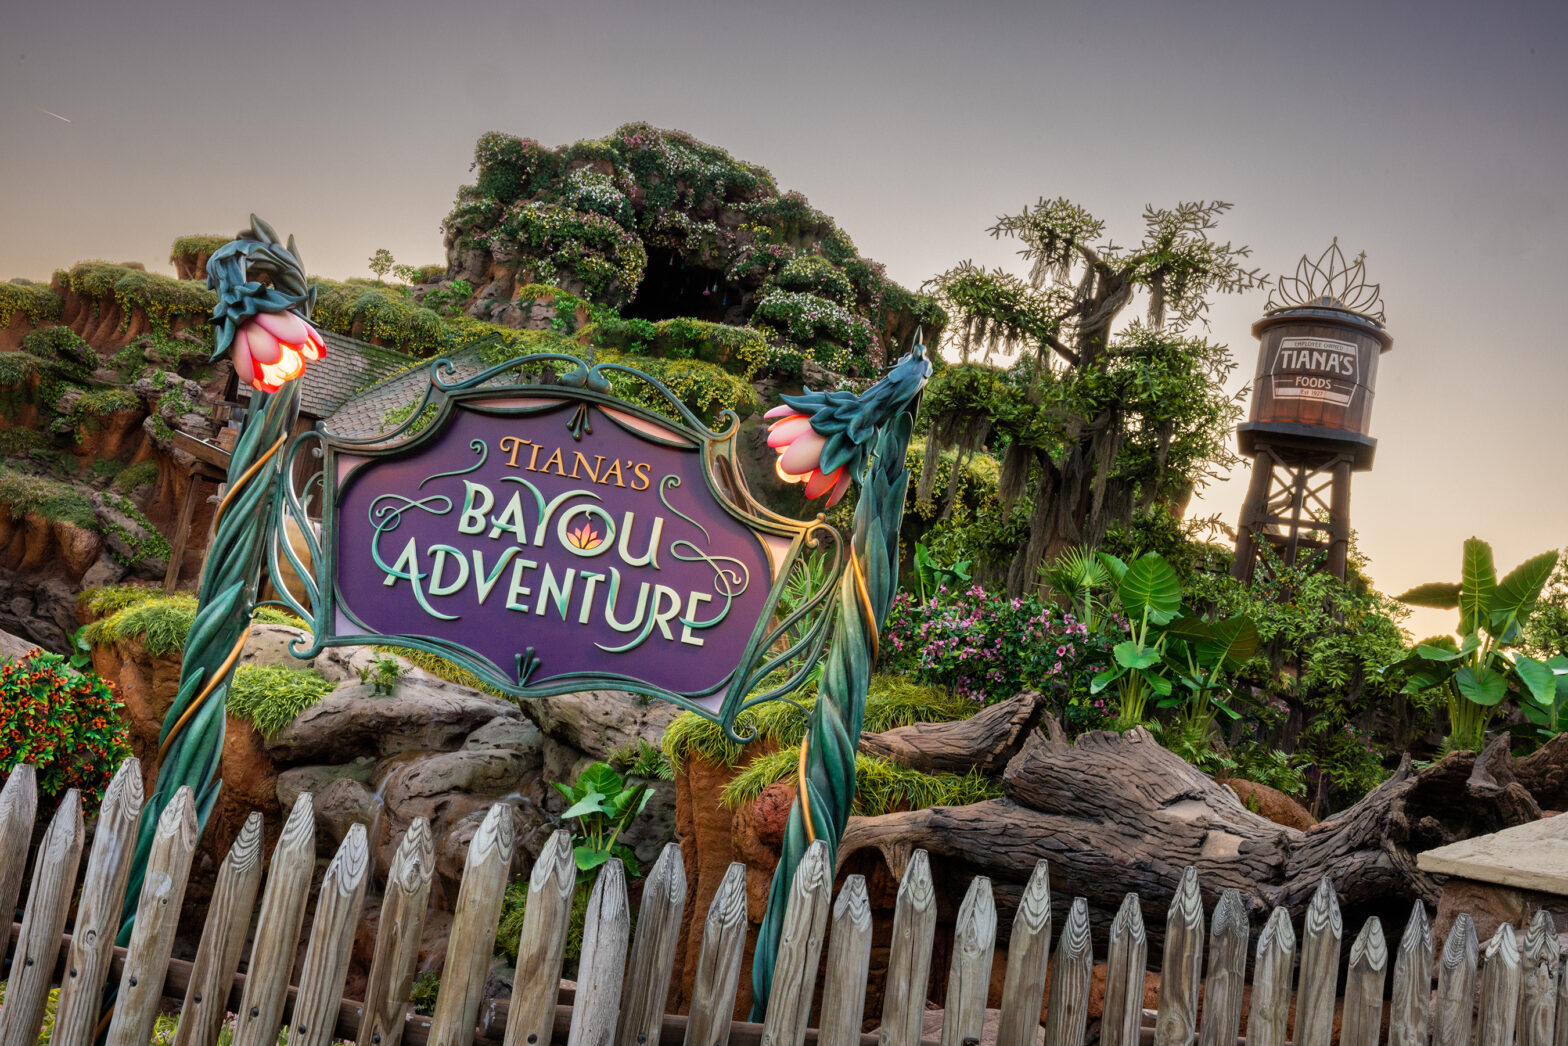 Tiana’s Bayou Adventure: Attraction Dedicated To Disney’s First African American Princess Puts Black Culture On Full Display